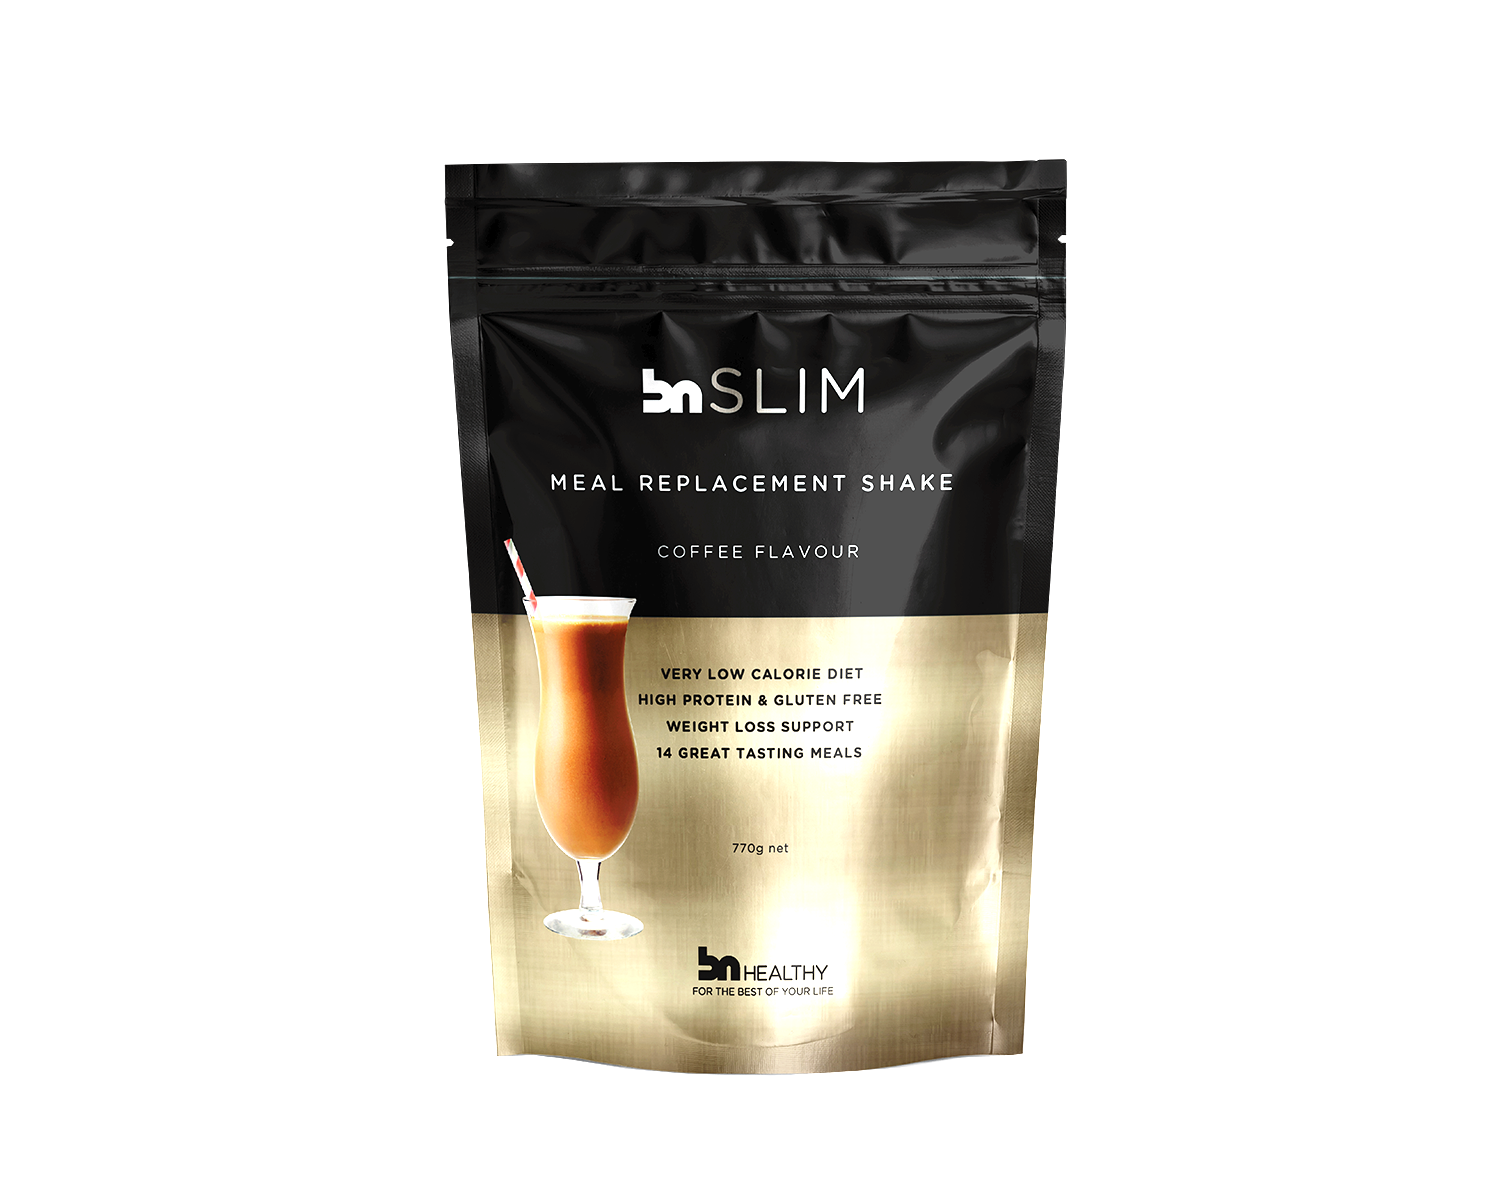 BN Slim - Meal Replacement Shake coffee flavour